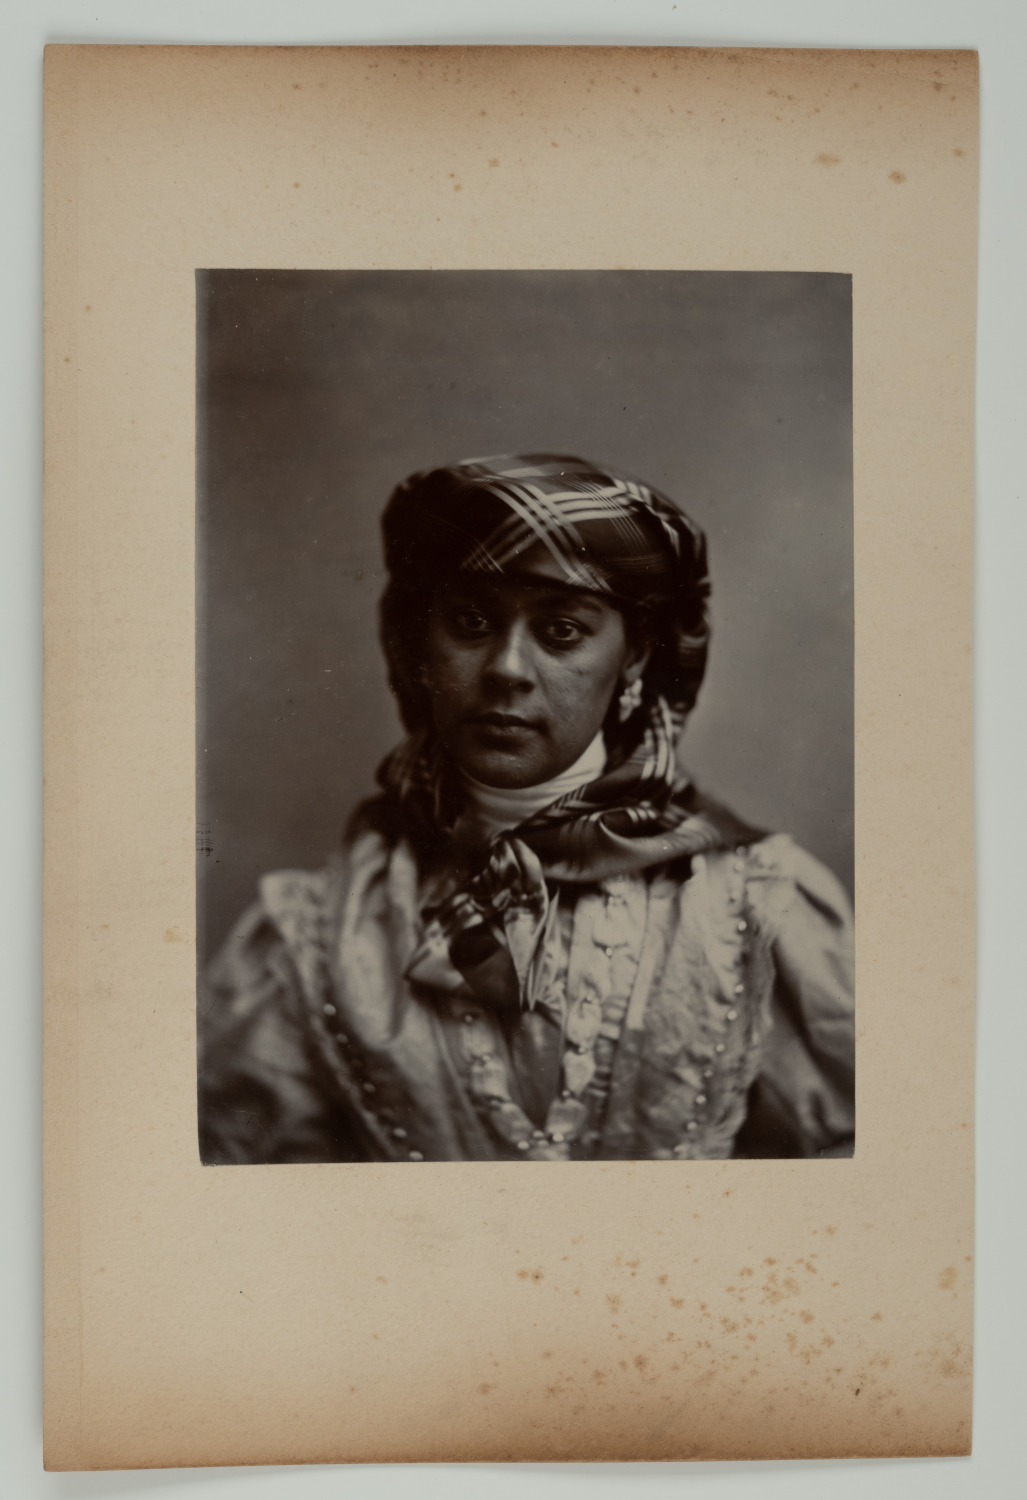 Vintage West Indies Creole Woman's Portrait in Bourgeois Outfit & Madras Headdress